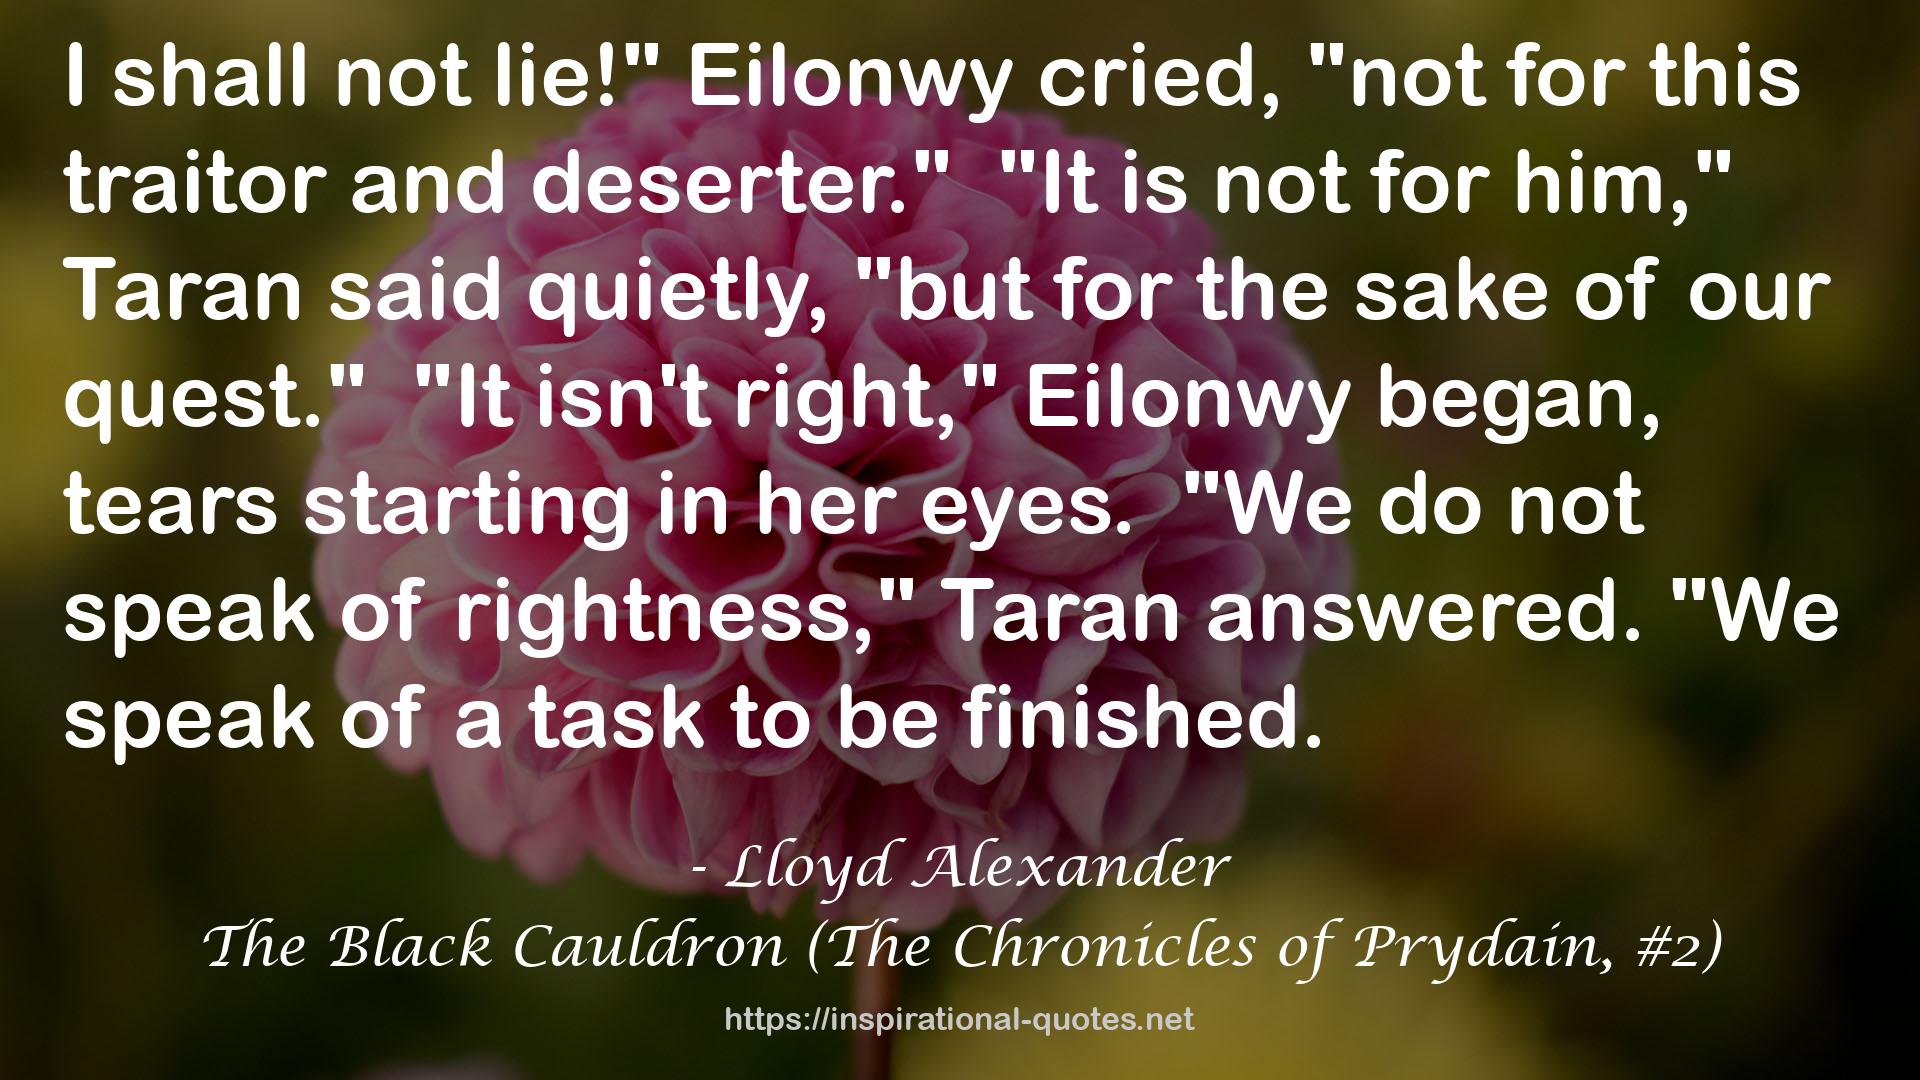 The Black Cauldron (The Chronicles of Prydain, #2) QUOTES